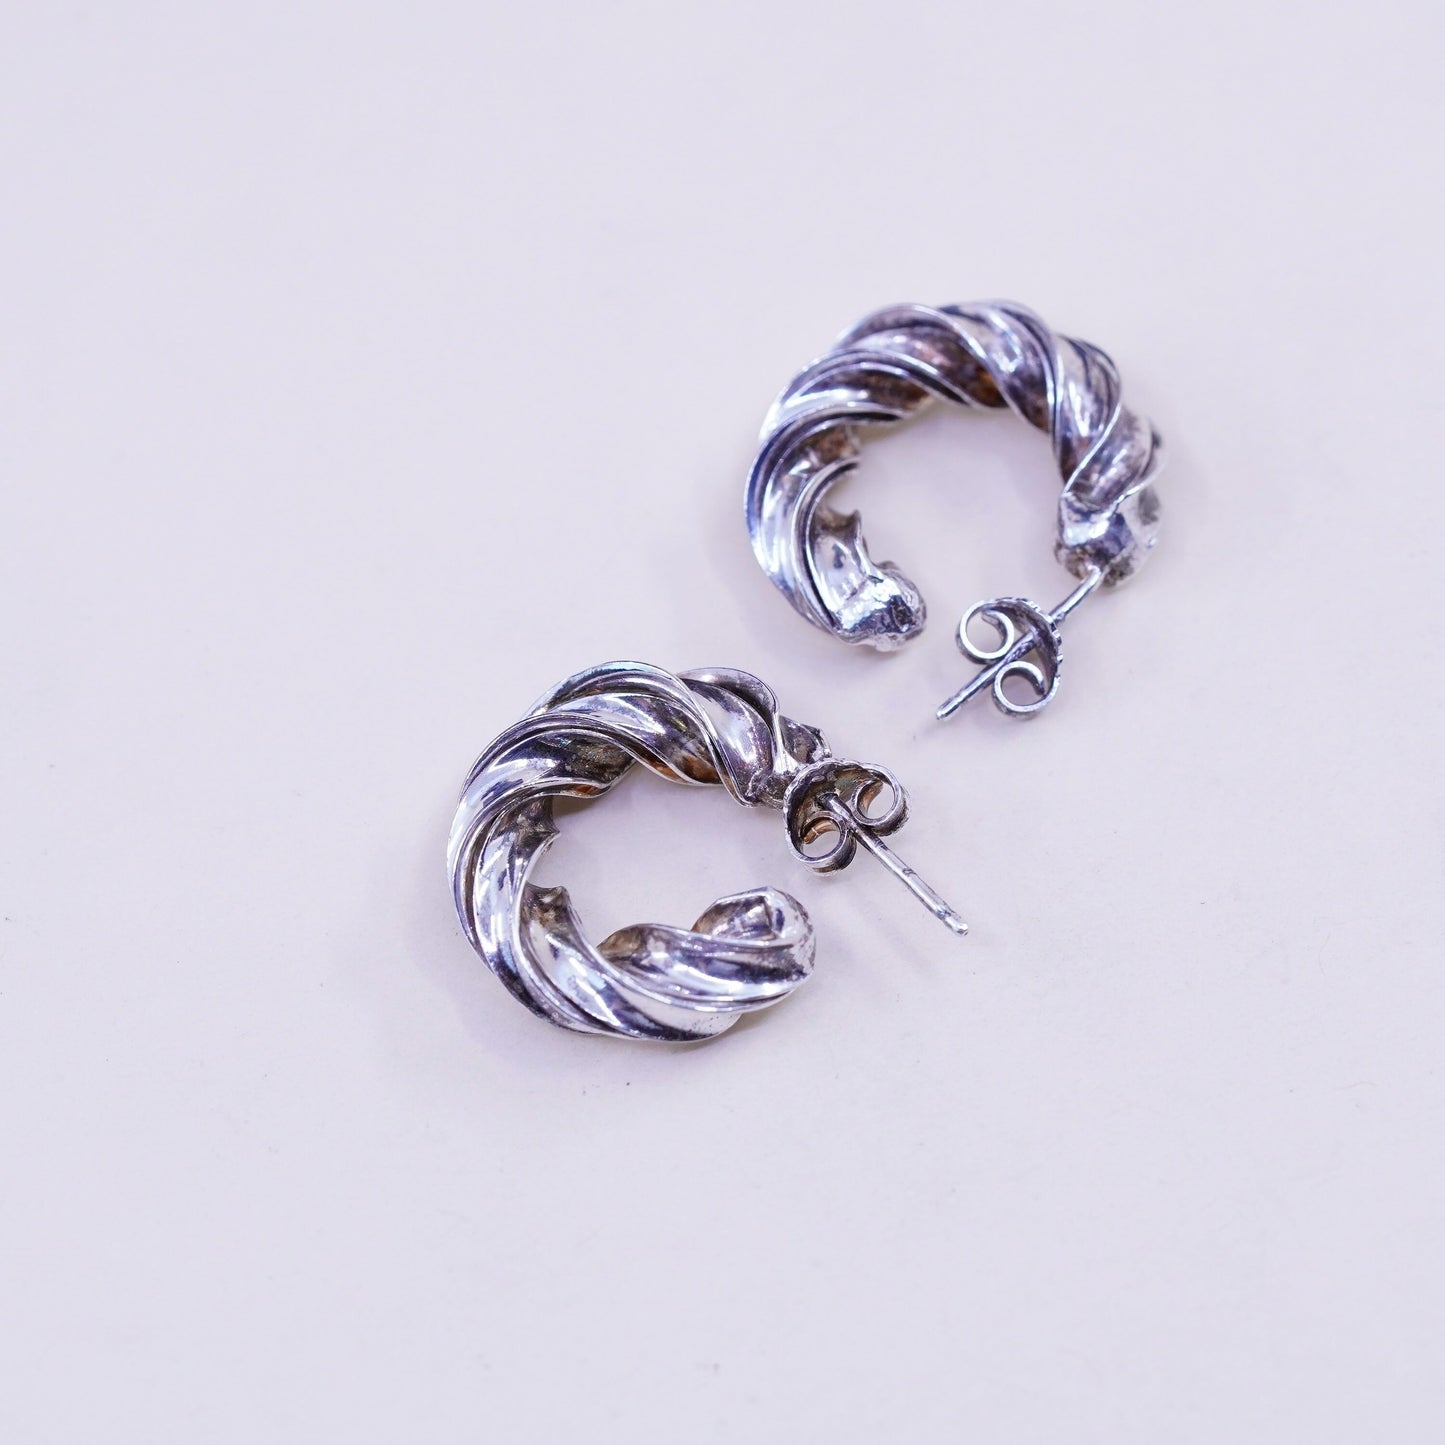 0.75”, Italy sterling silver huggie earrings, entwined twisted primitive hoops